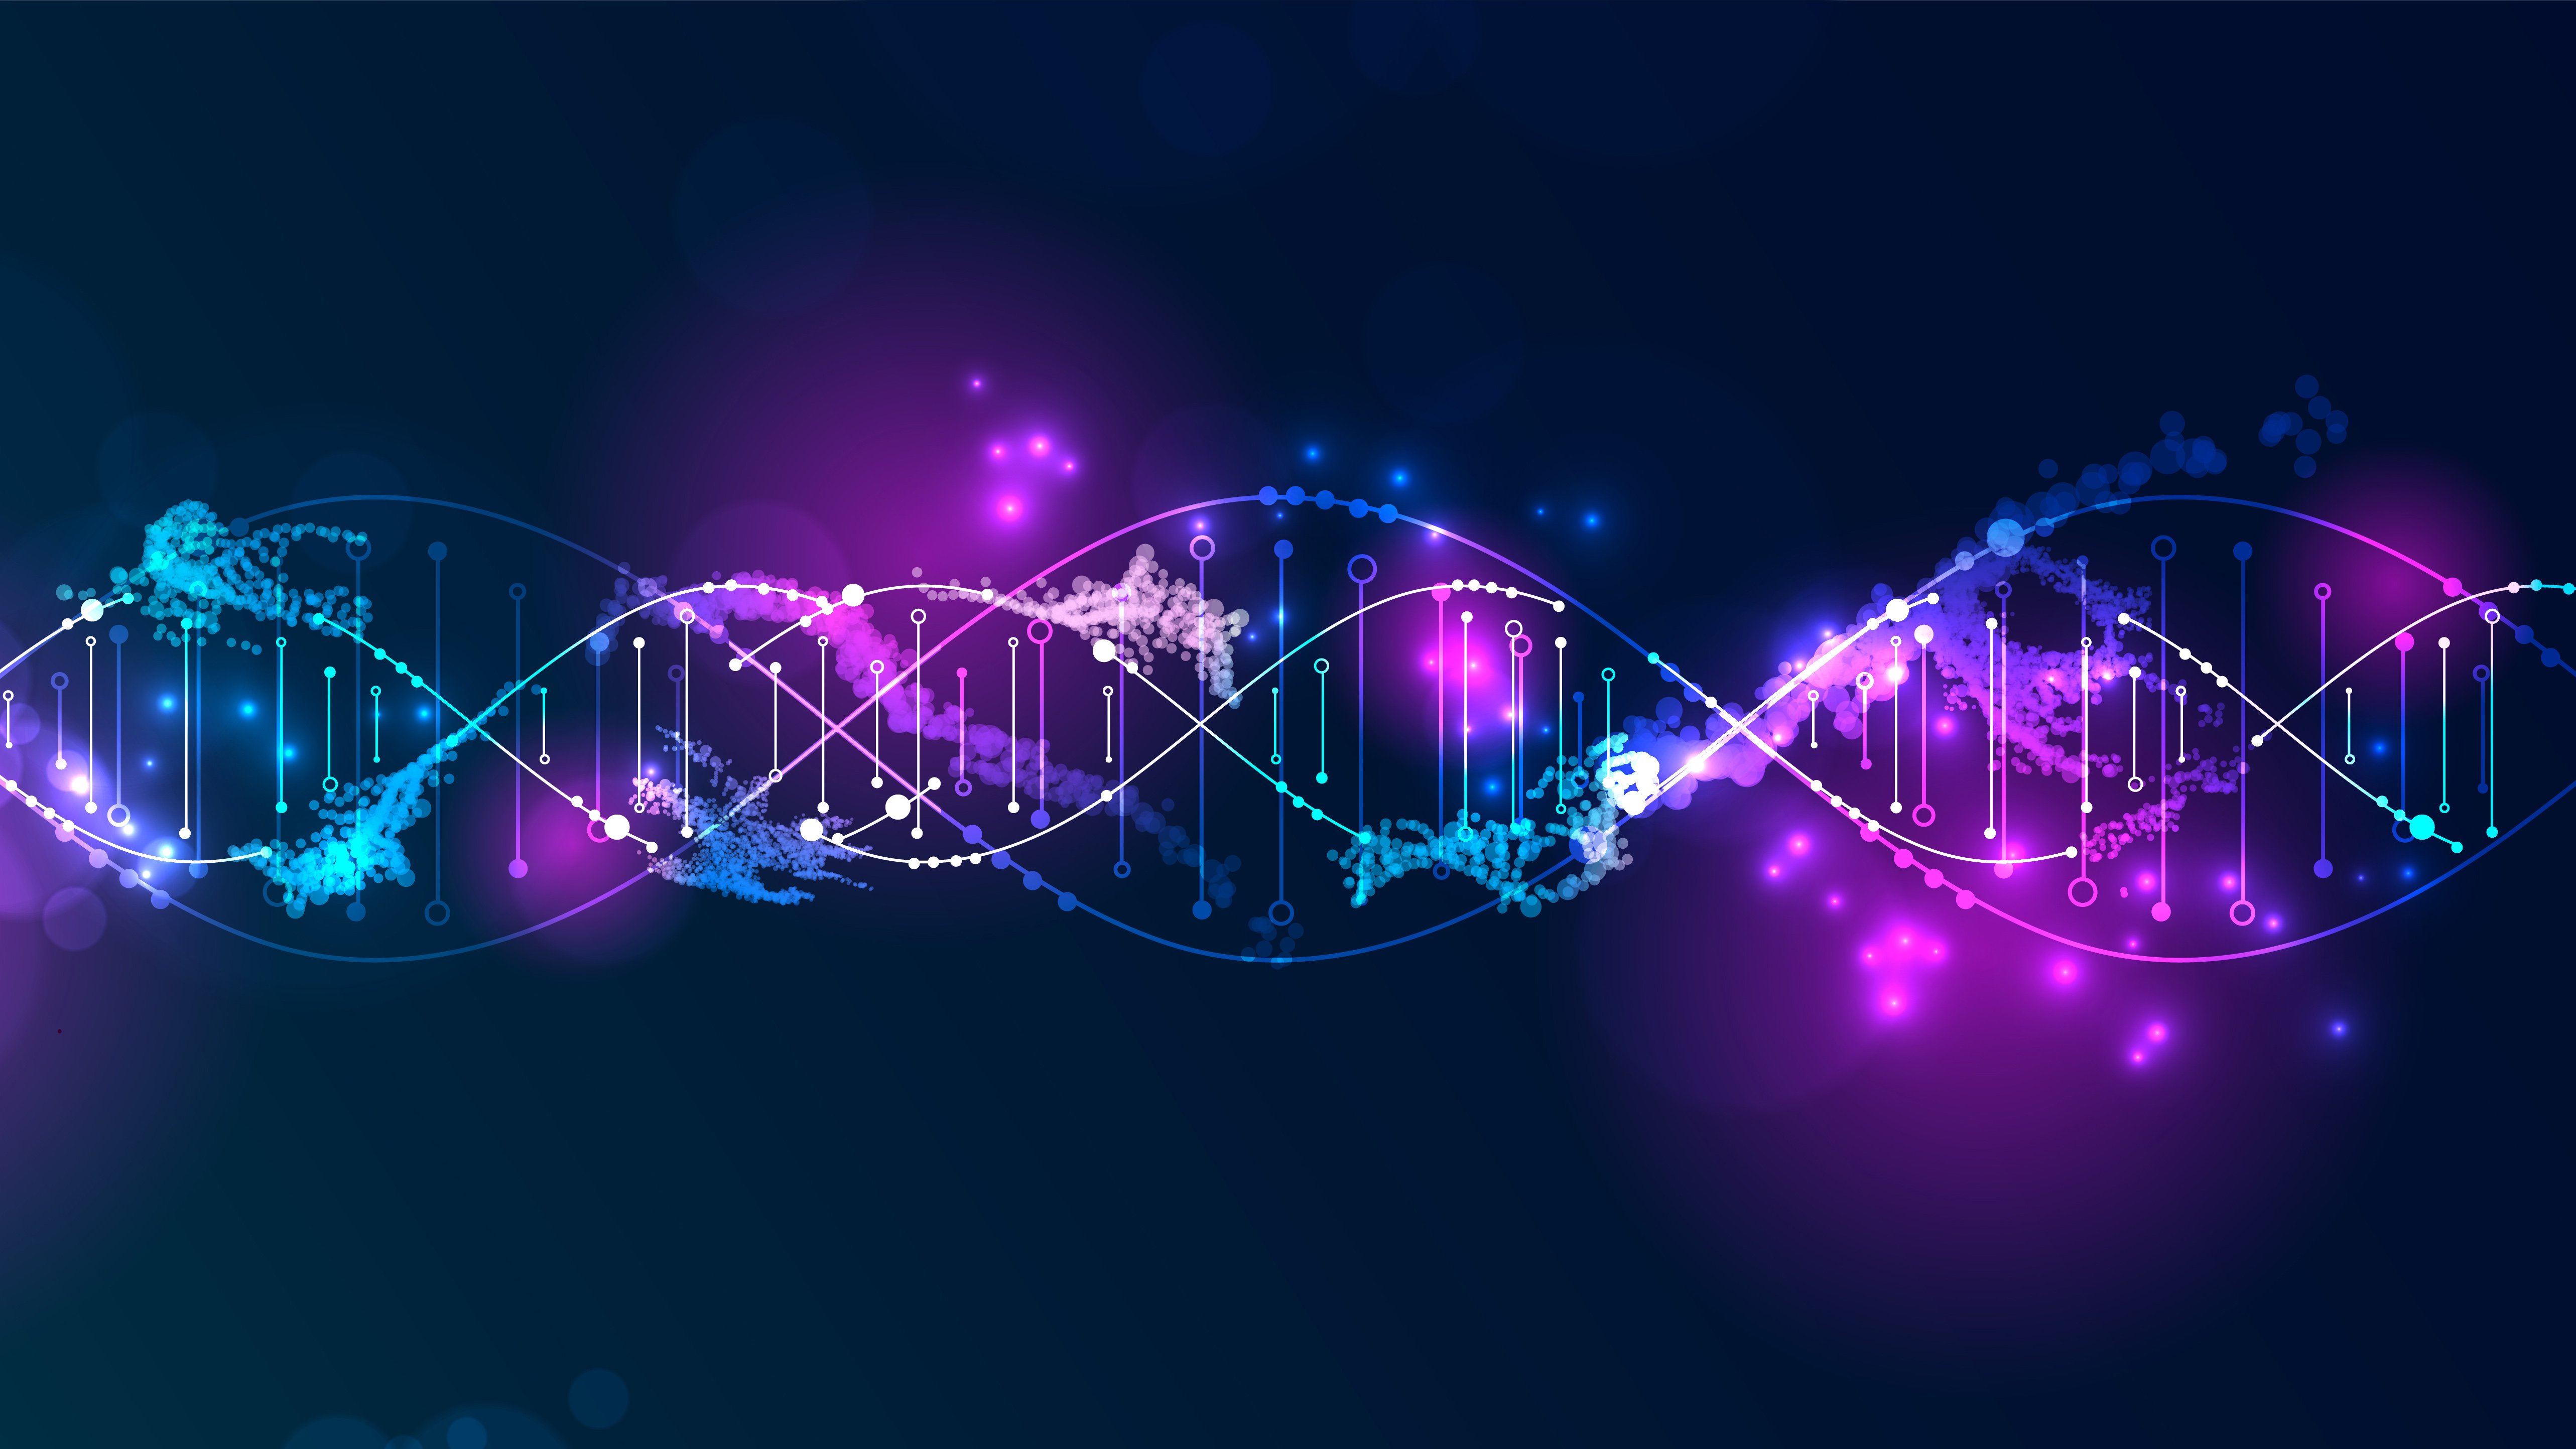 JPM24: PacBio puts up 56% annual growth after 2023's long- and short-read DNA sequencer launches